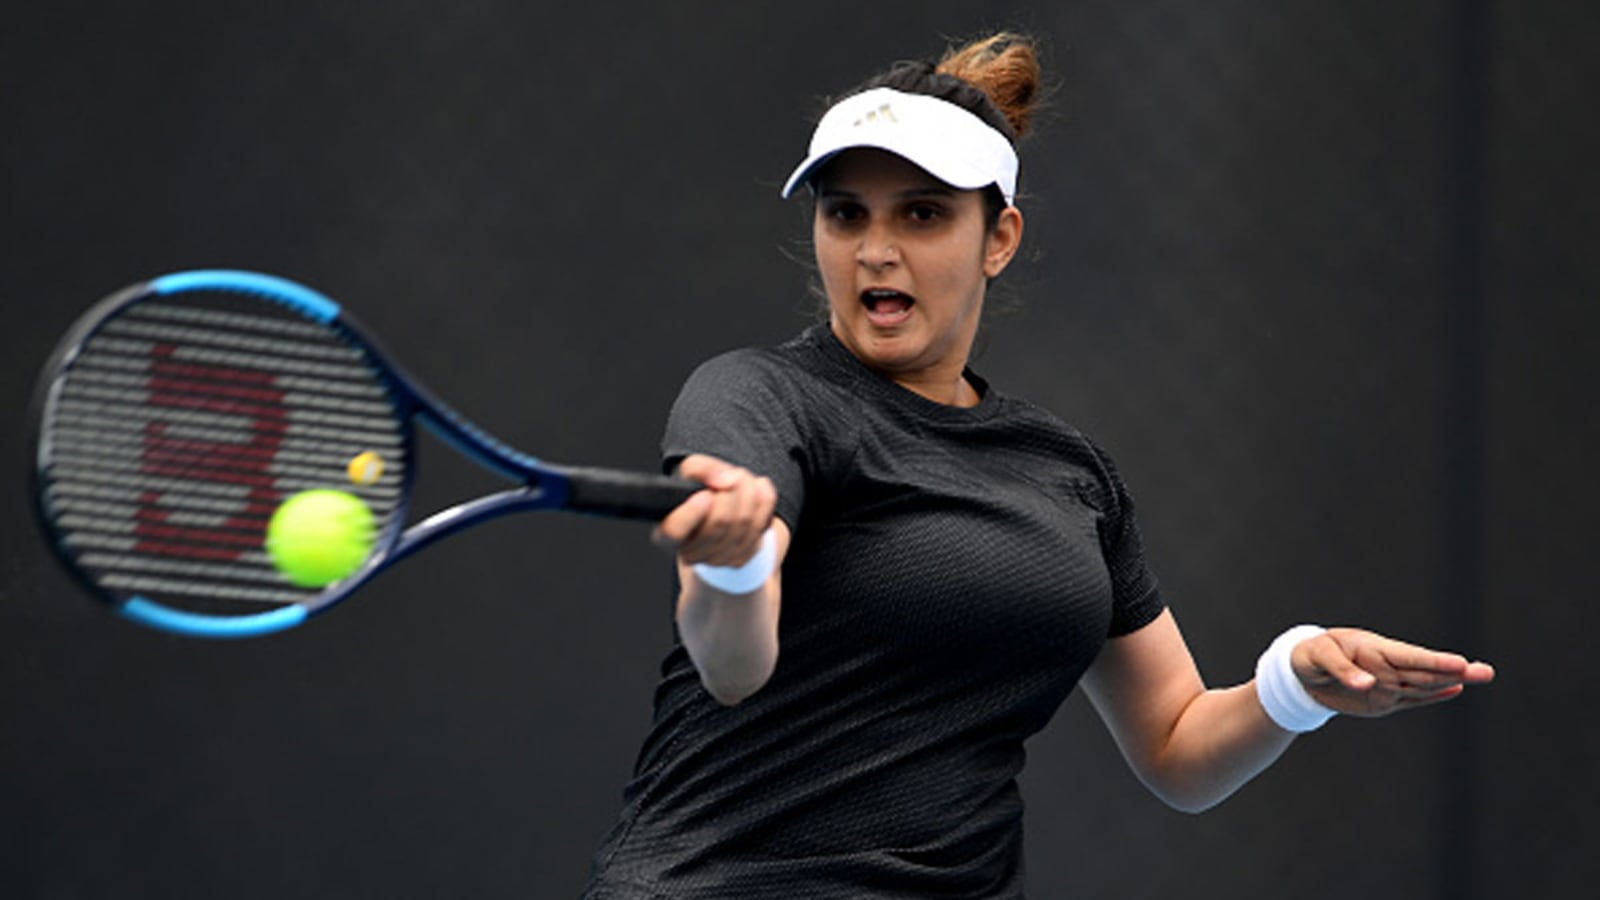 For Sania Mirza, belief to take on the best is what matters most | Tennis  News - Hindustan Times